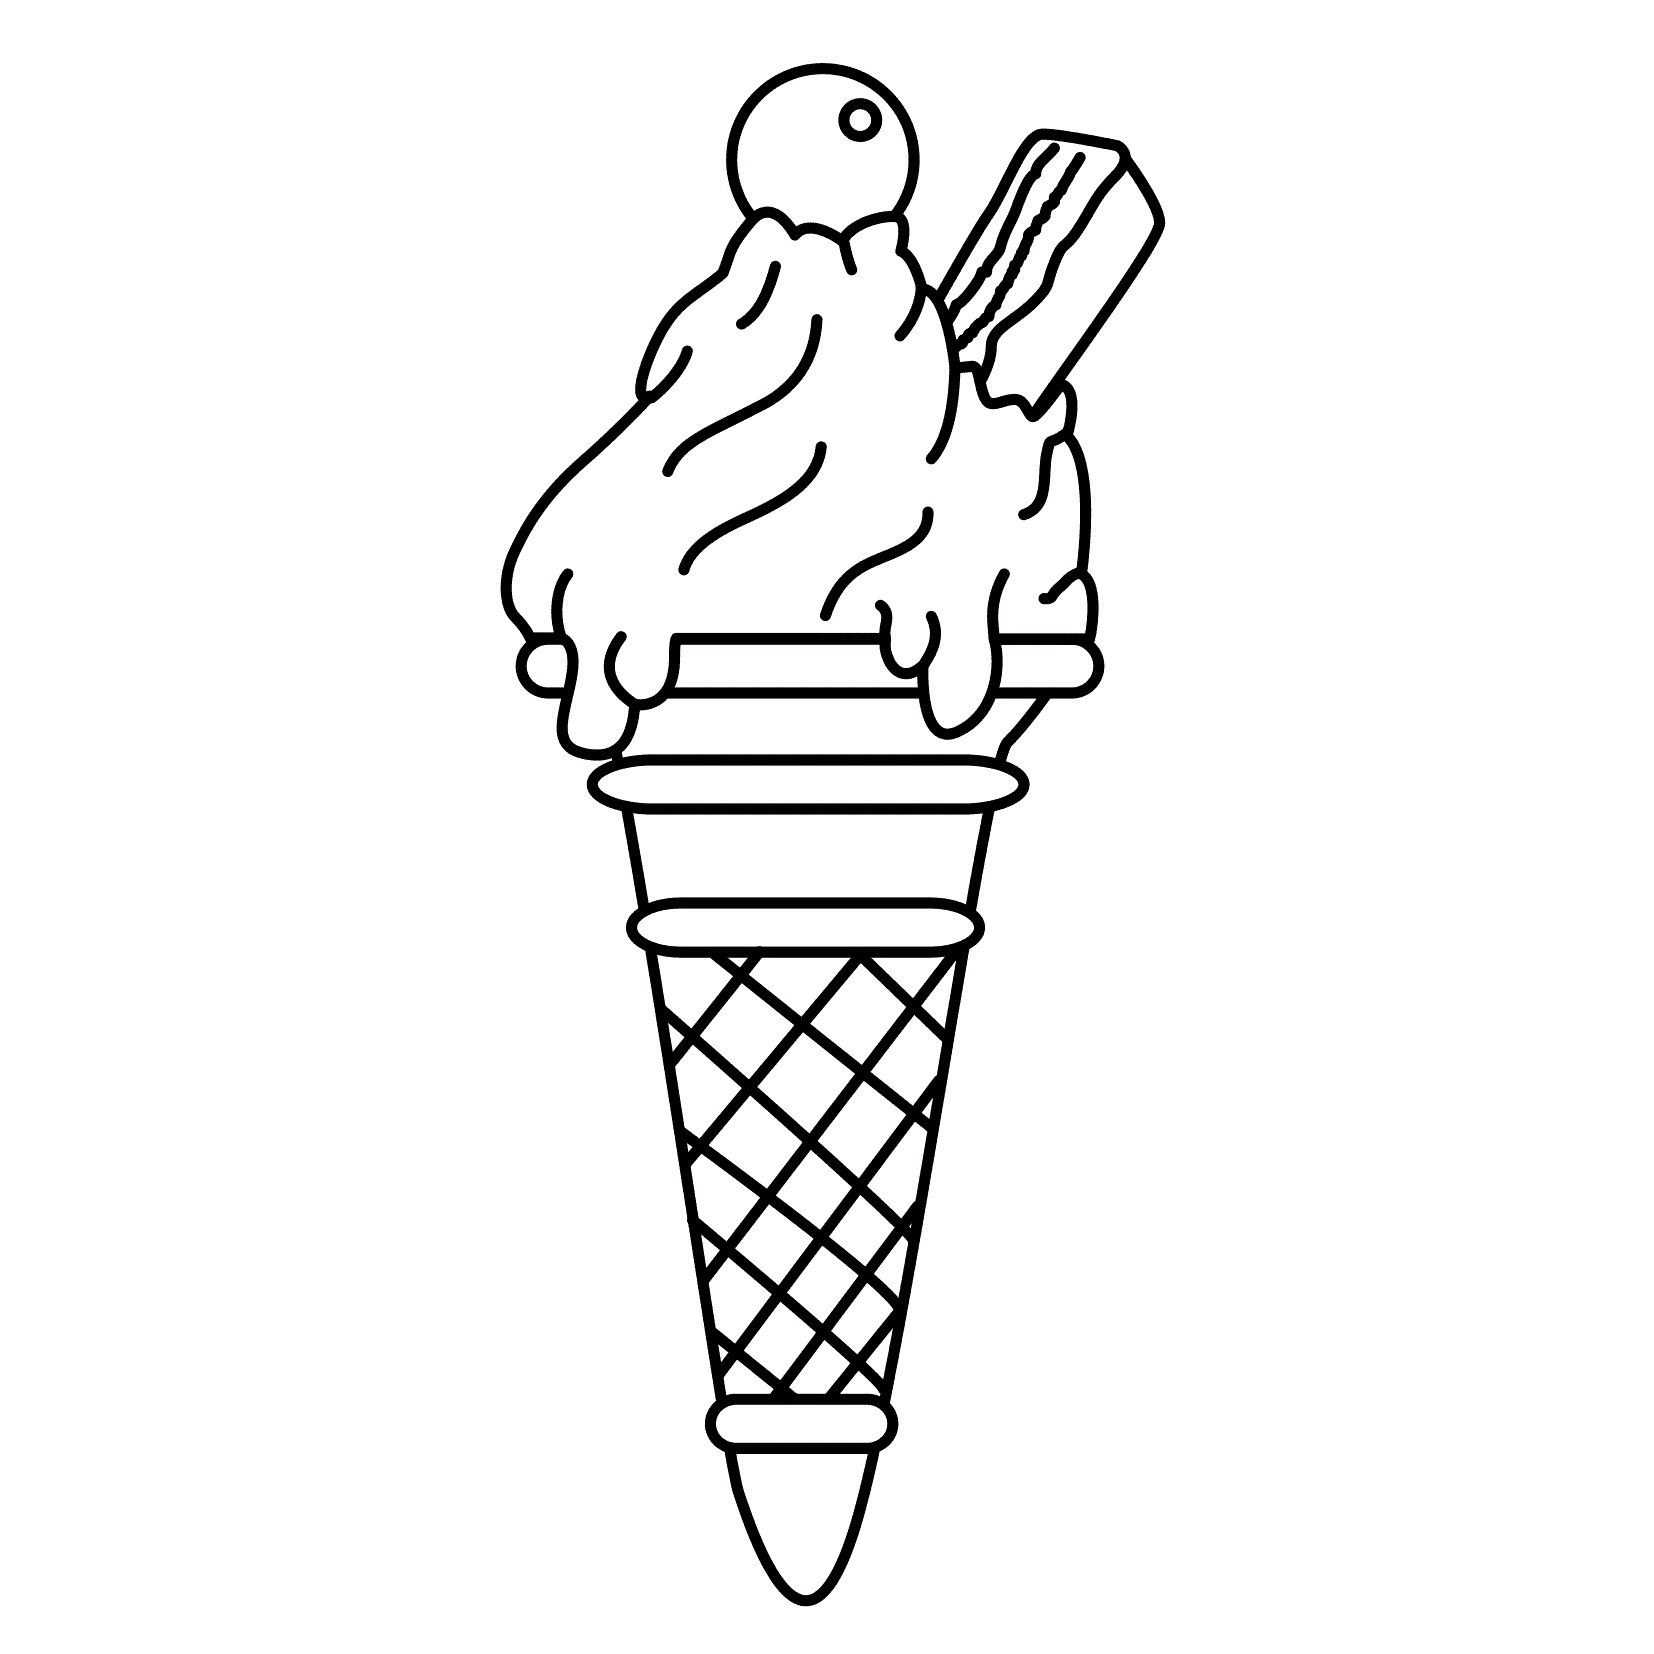 272 Cute Ice Cream Cone Coloring Pages To Print with Animal character